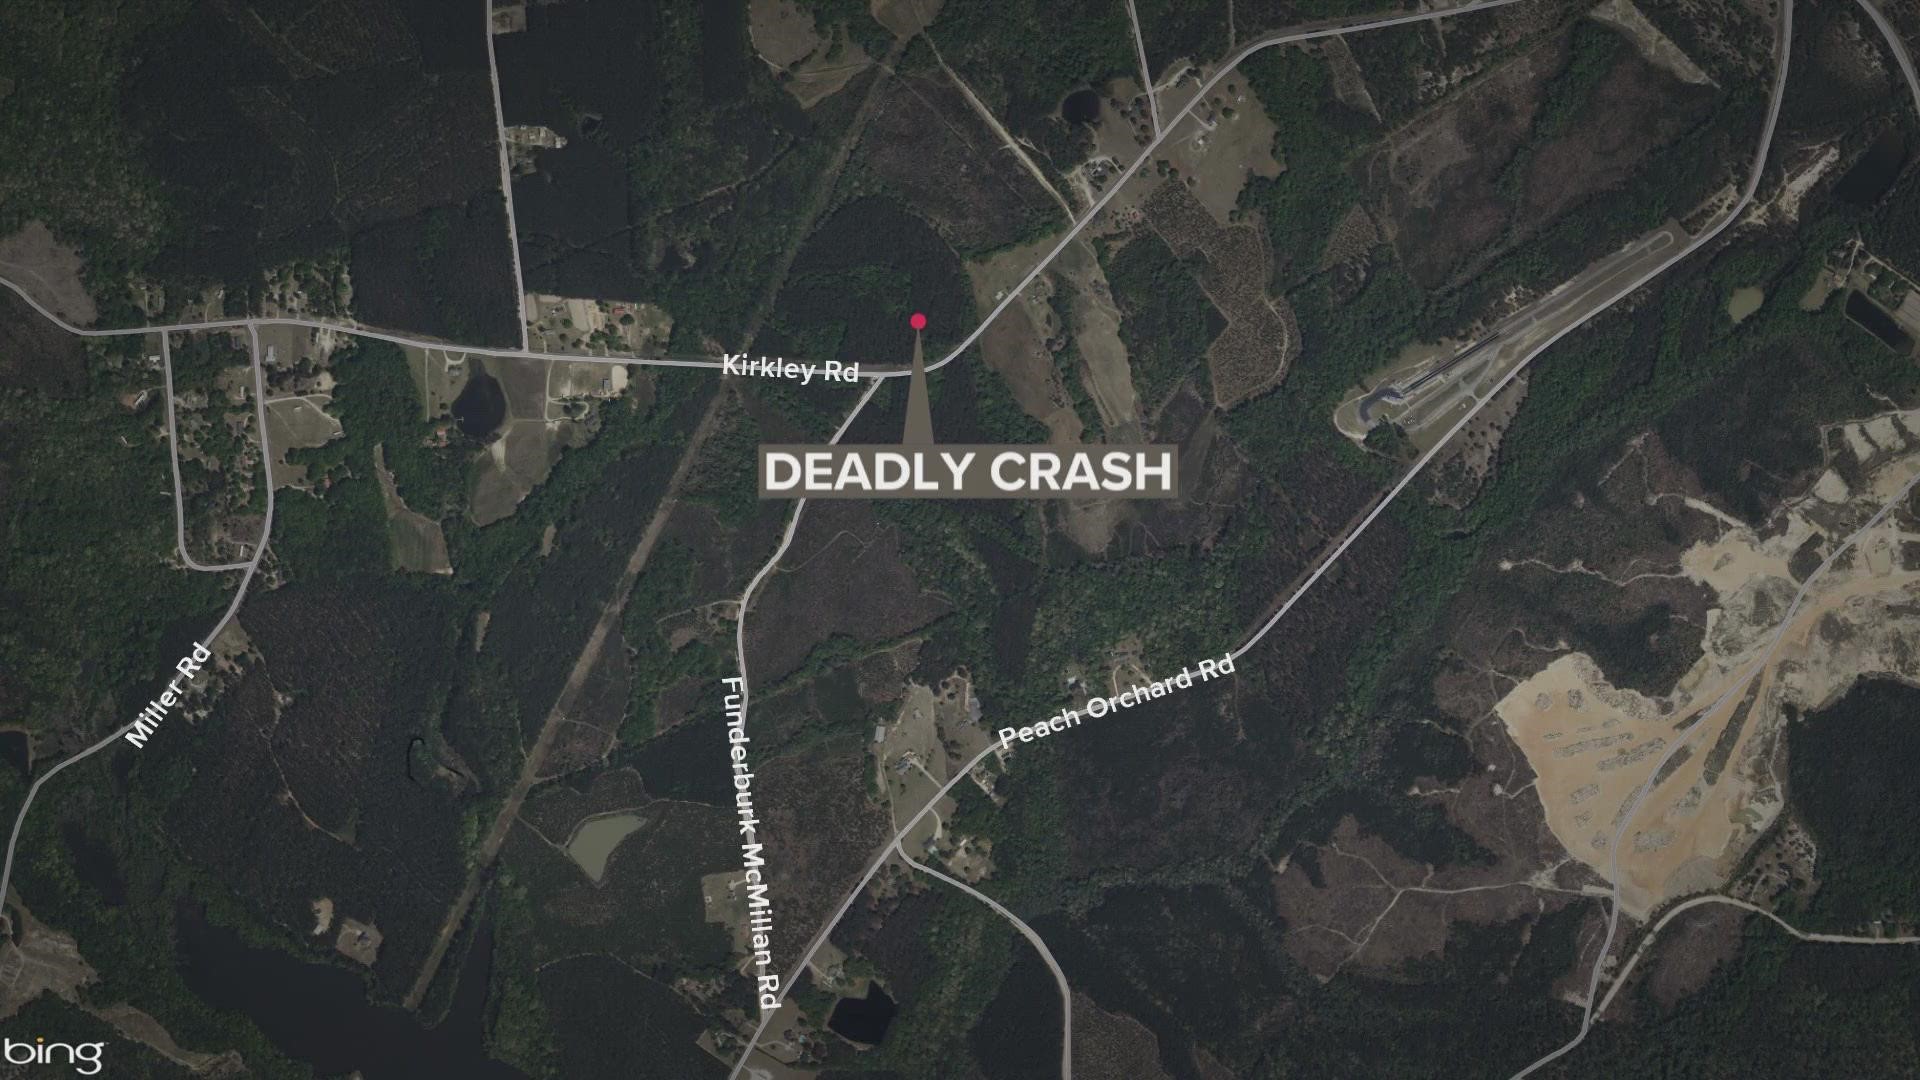 One person was killed and two others were hurt in a crash on Kirkley Road in Chesterfield County late Tuesday night.